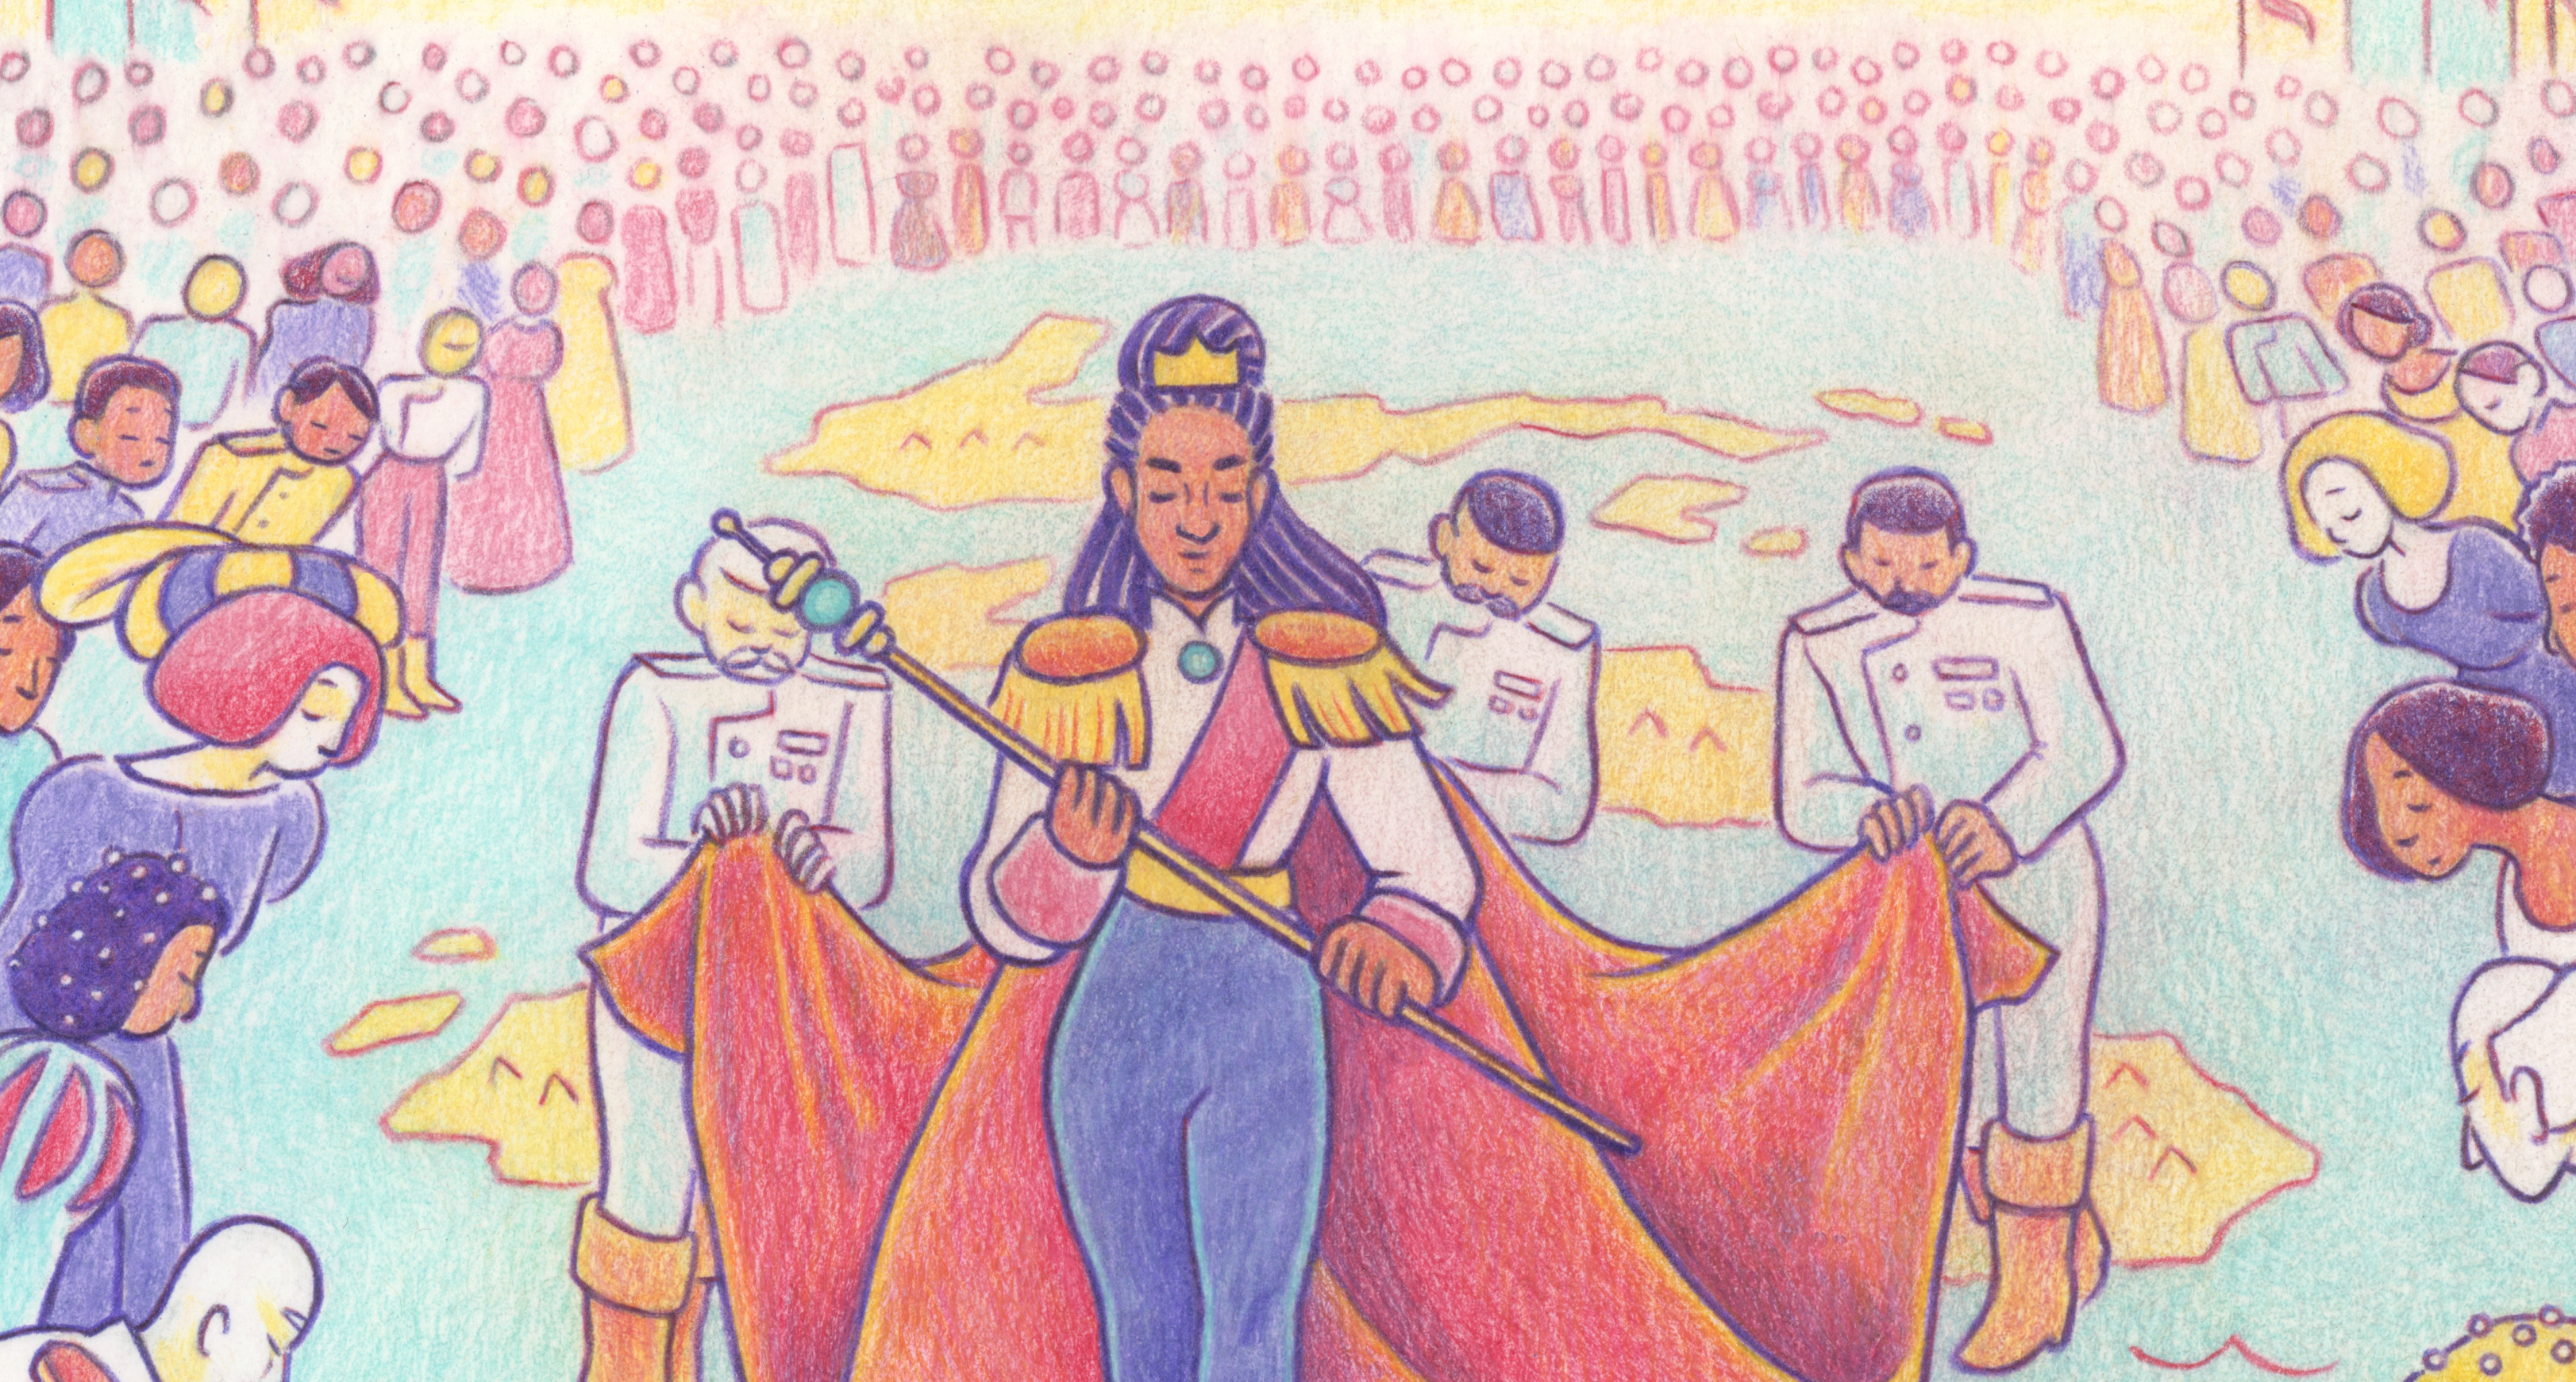 A Black woman in a crown with a long red cape held up by three liveried servants ascends an unseen height with a vast crowd behind her in Other Ever Afters